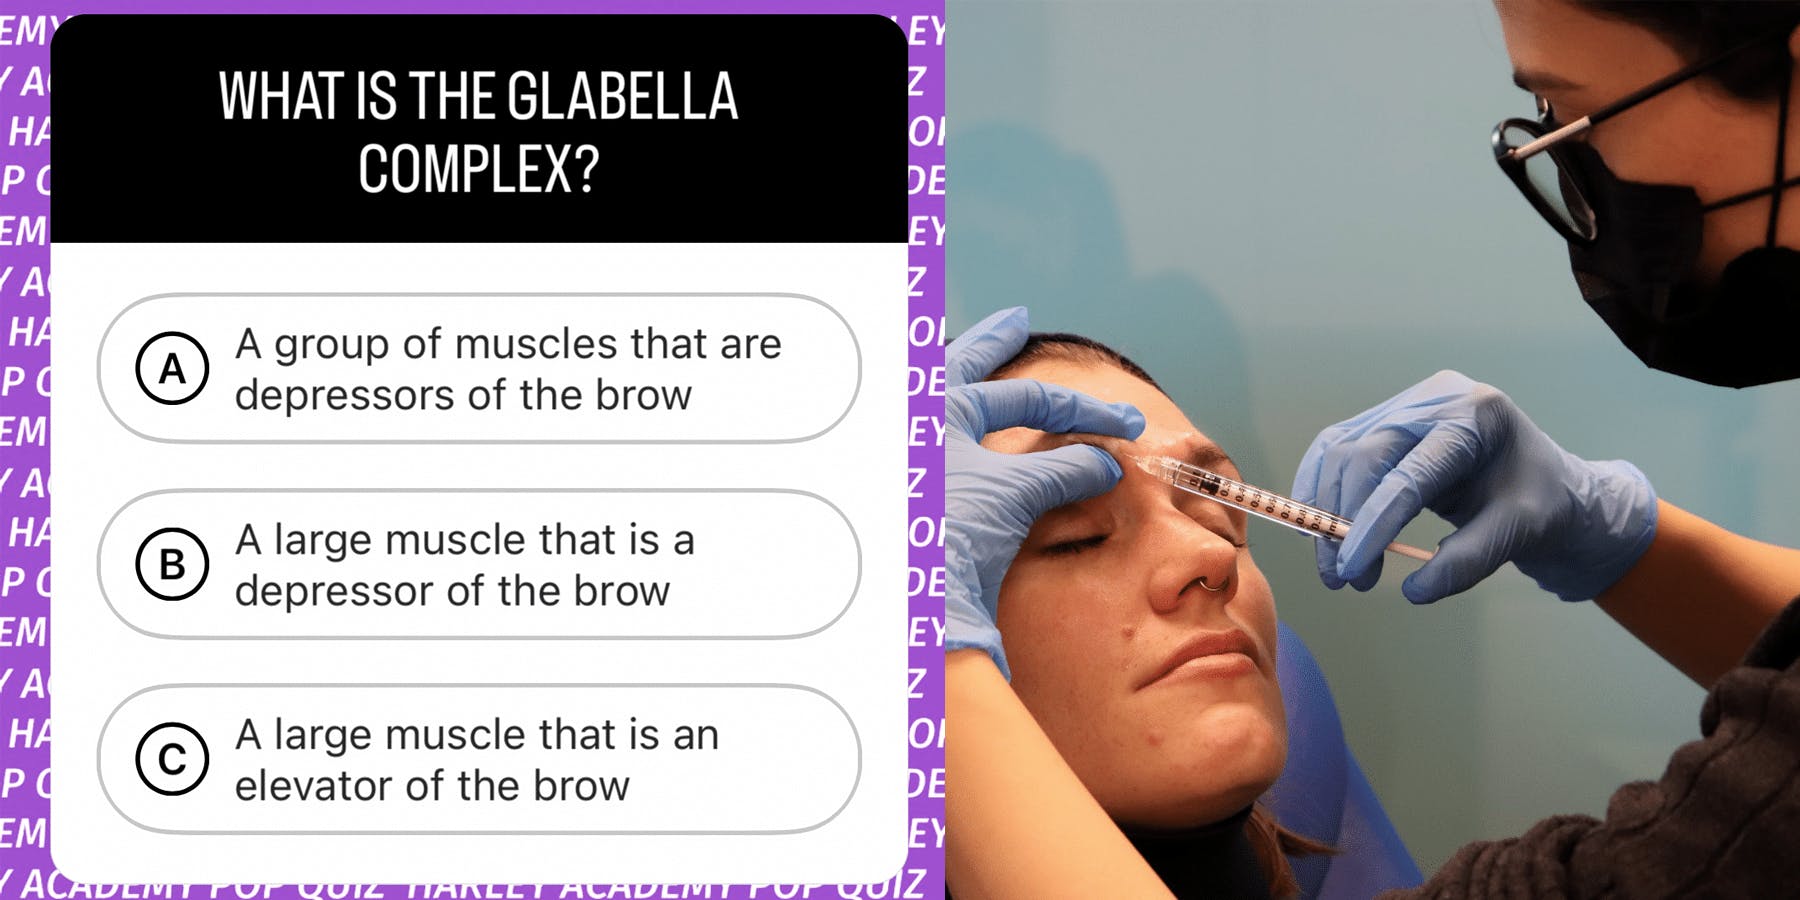 What is the glabella complex